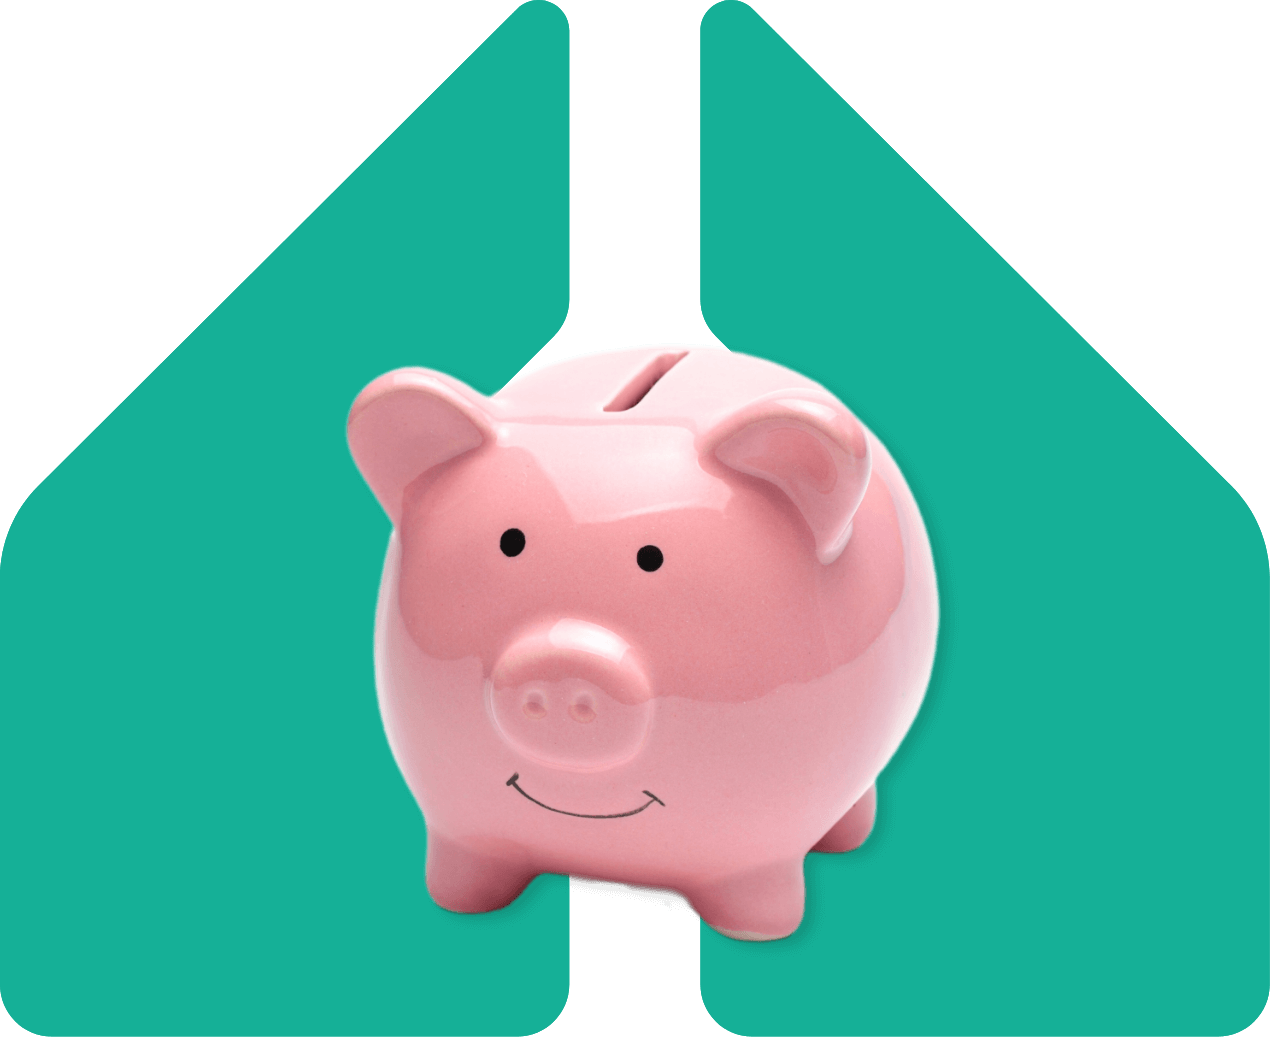 Image showing a piggy bank in a pair of speech marks